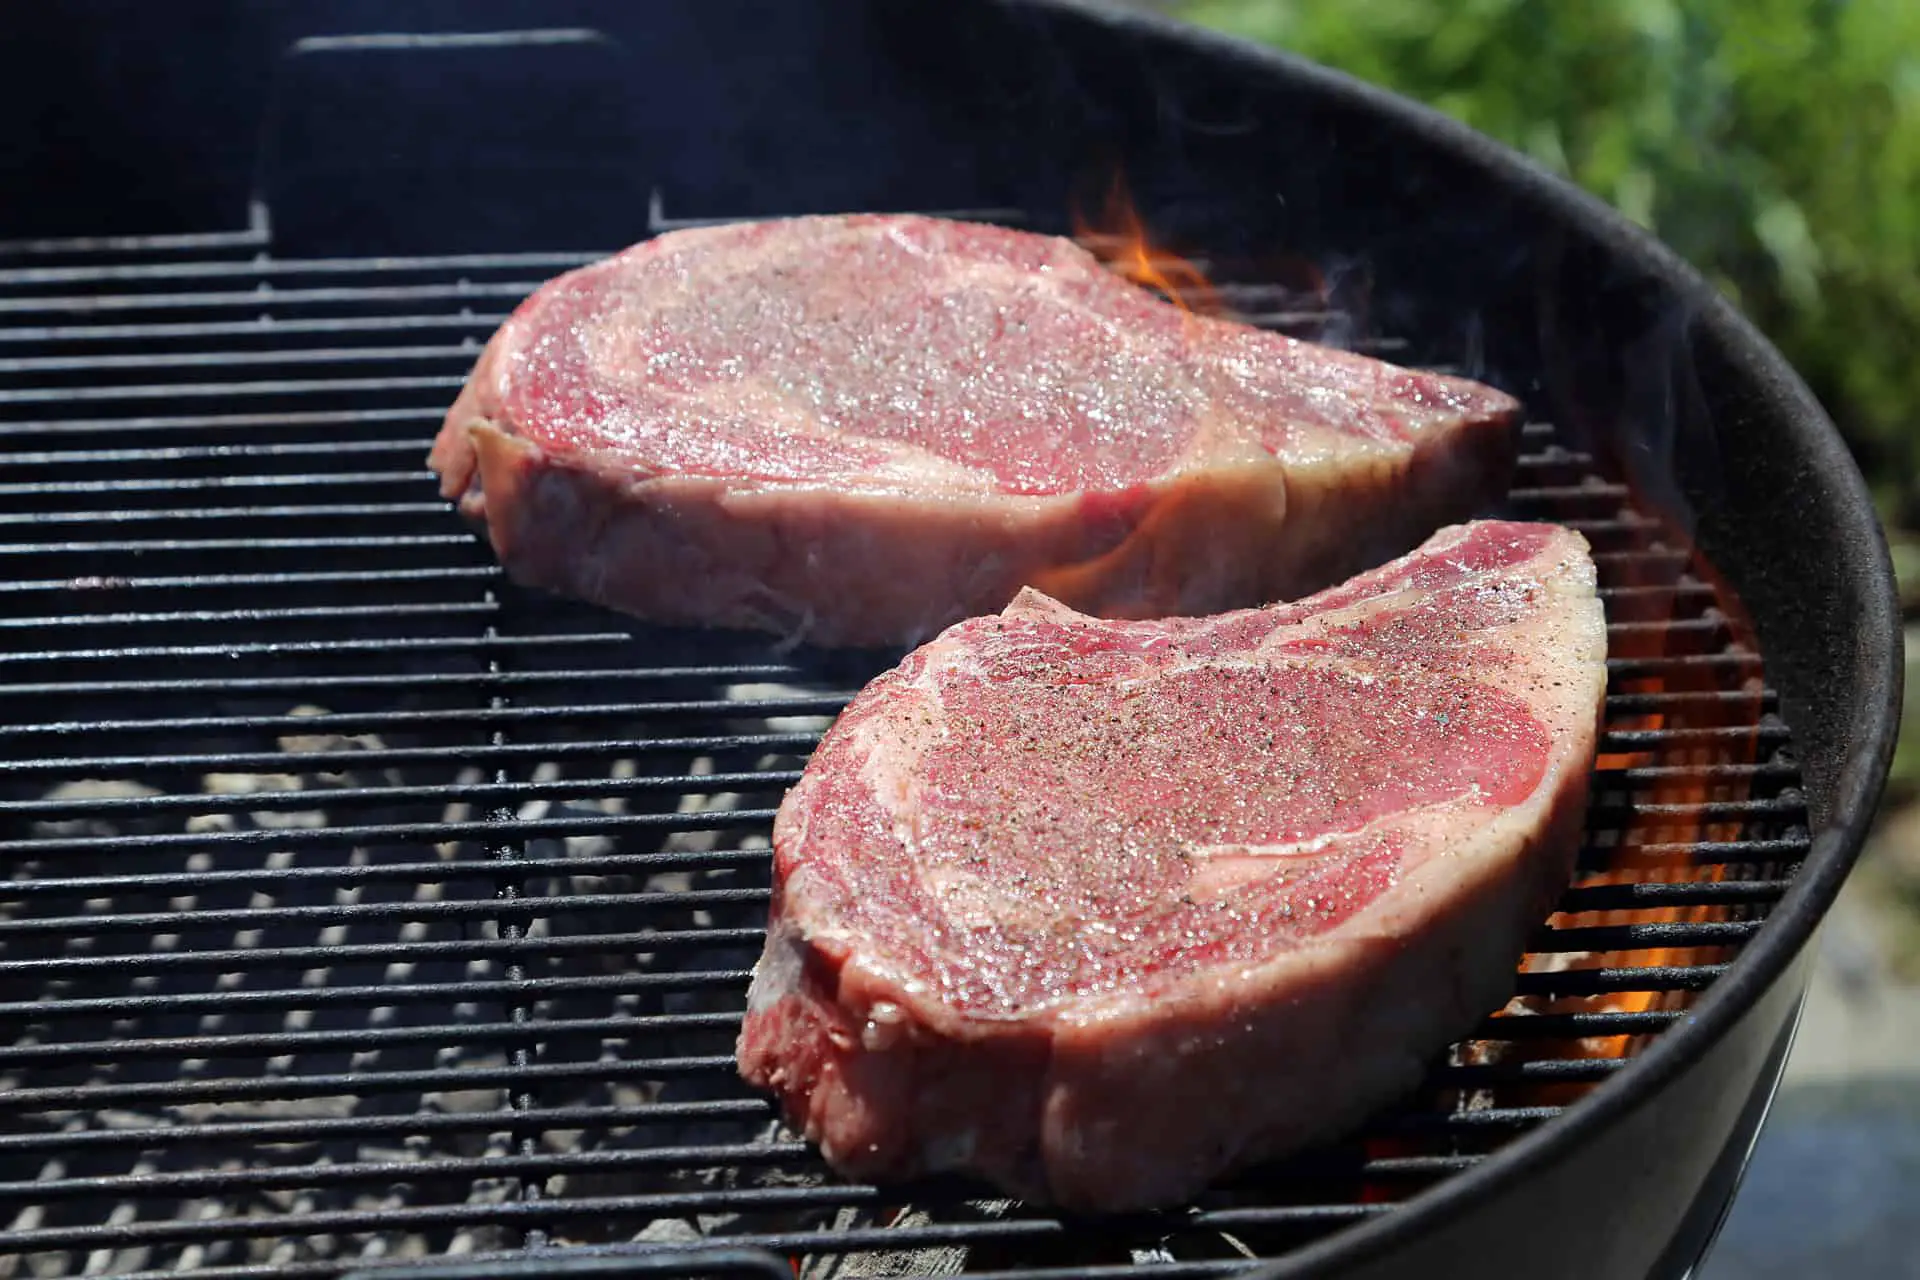 How to Charcoal Grill a Steak to Perfection